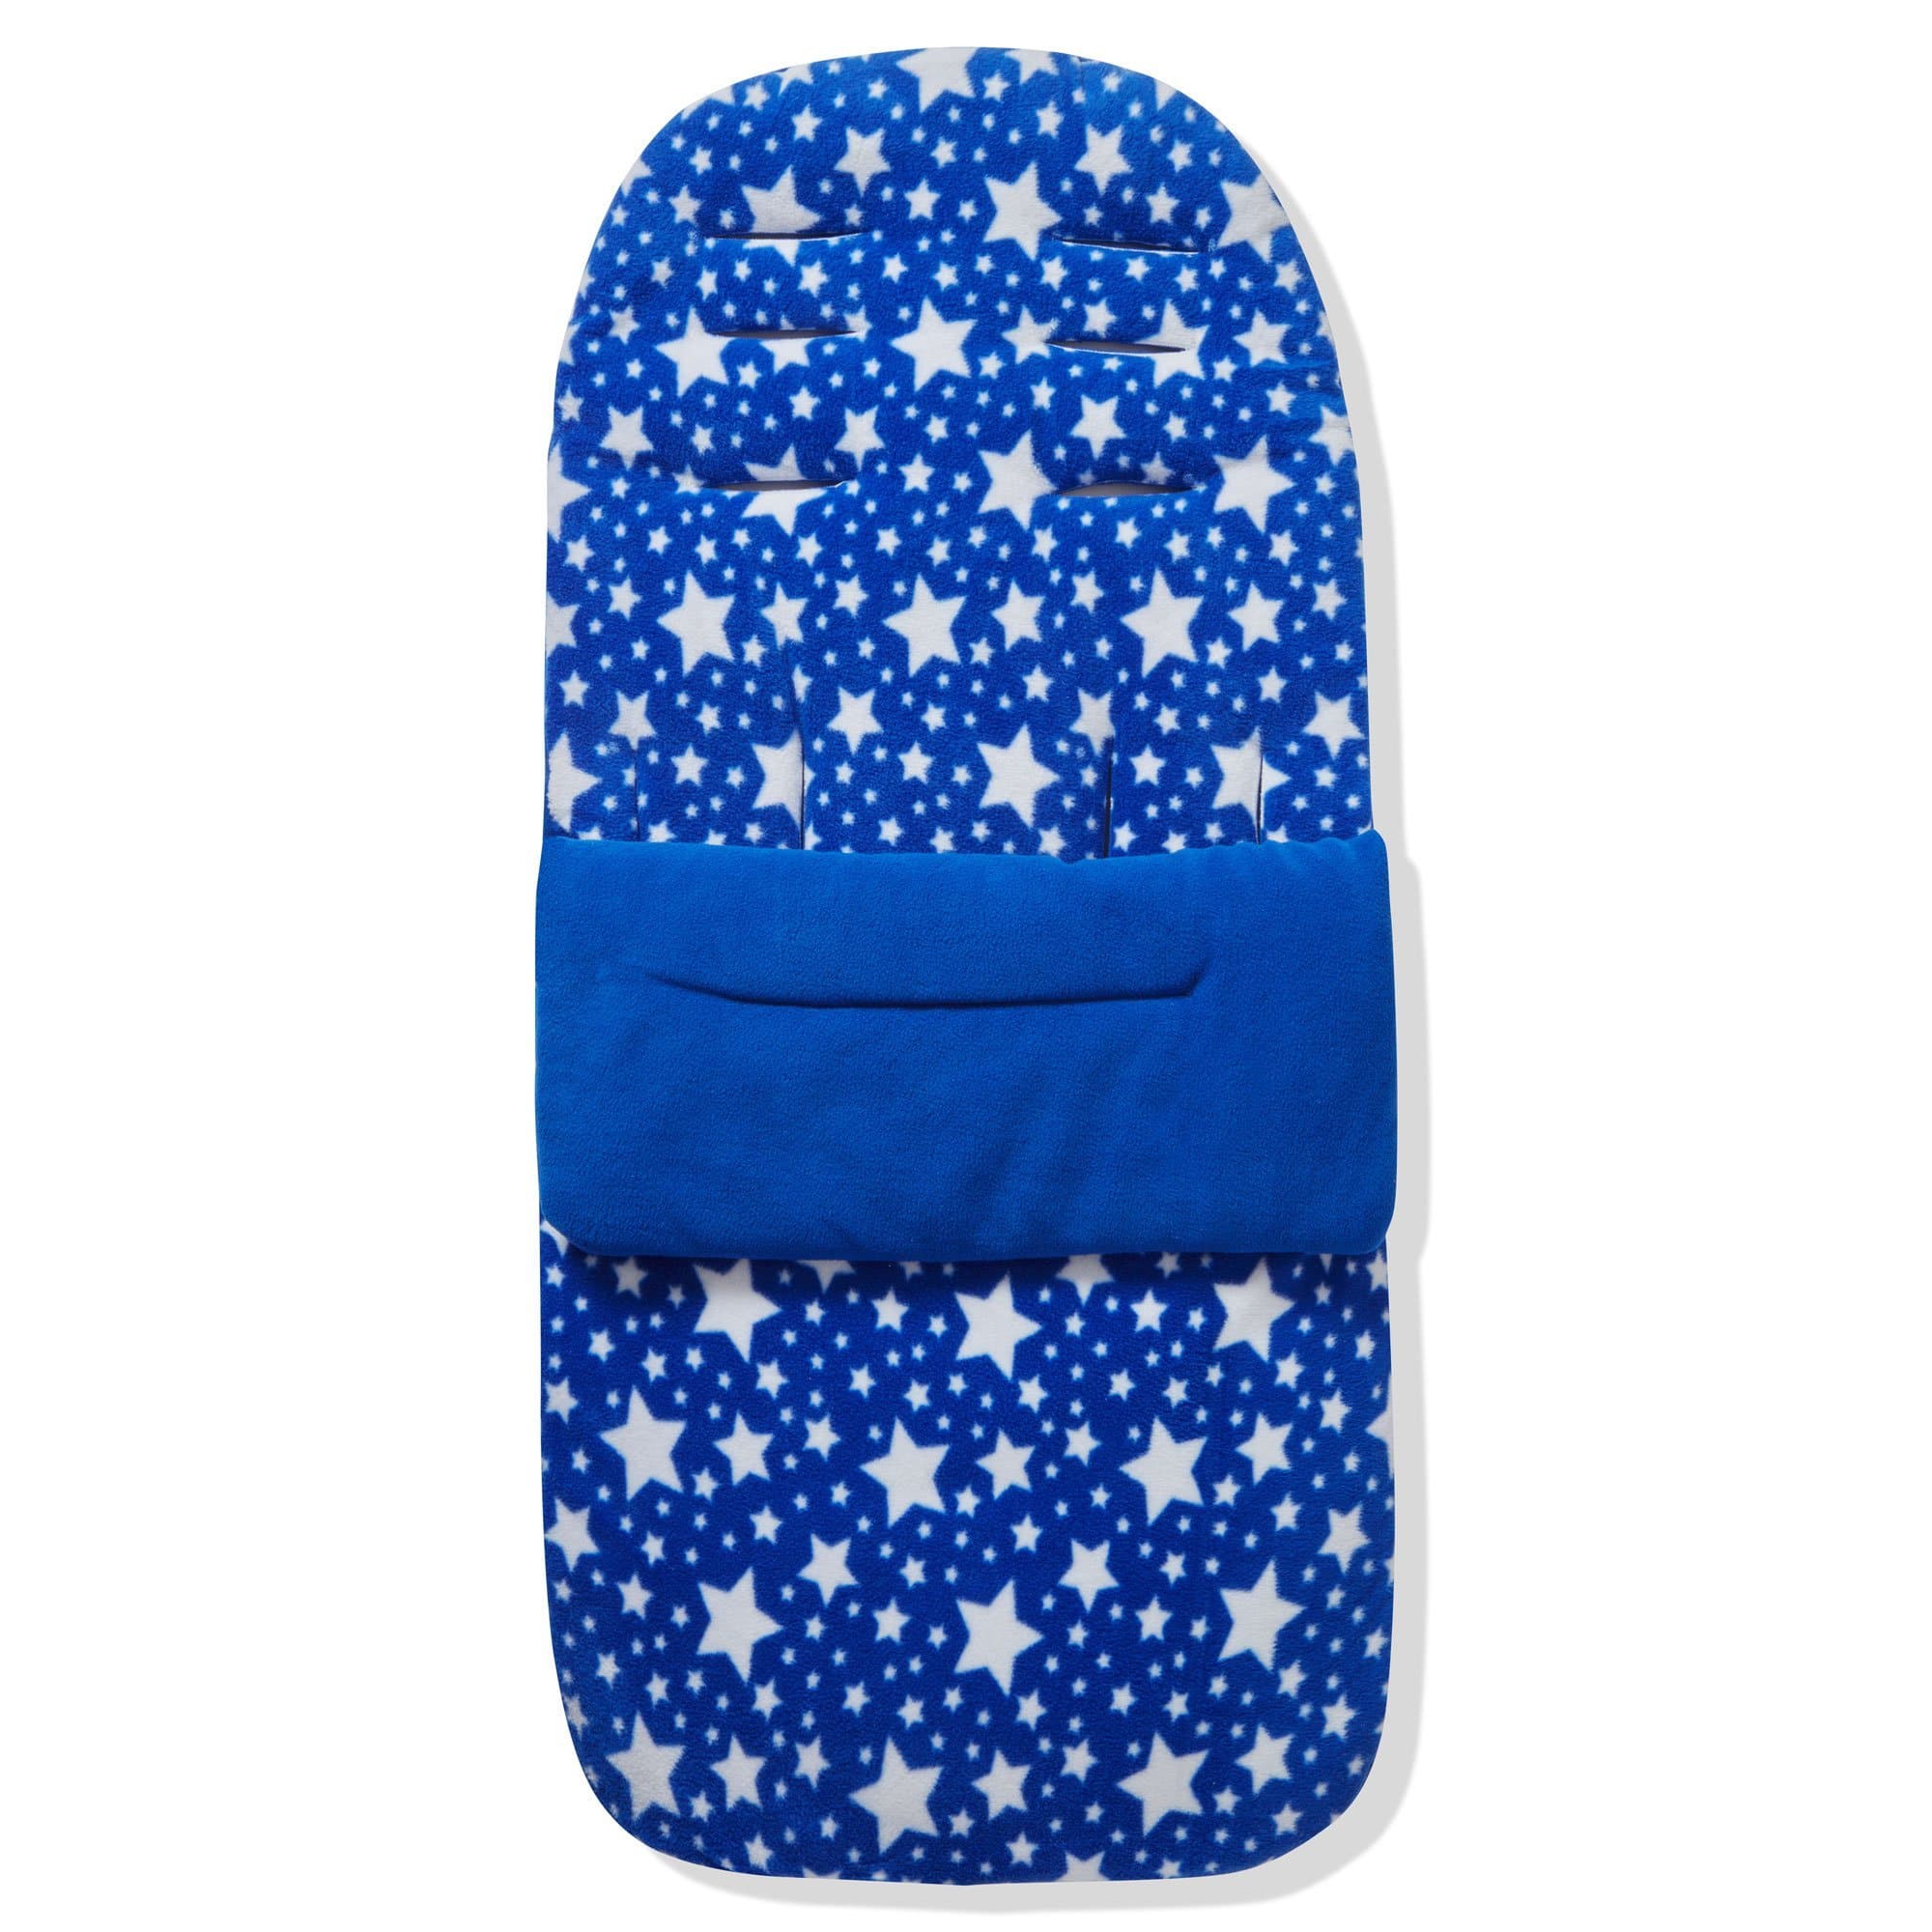 Fleece Footmuff / Cosy Toes Compatible with Gesslein - For Your Little One